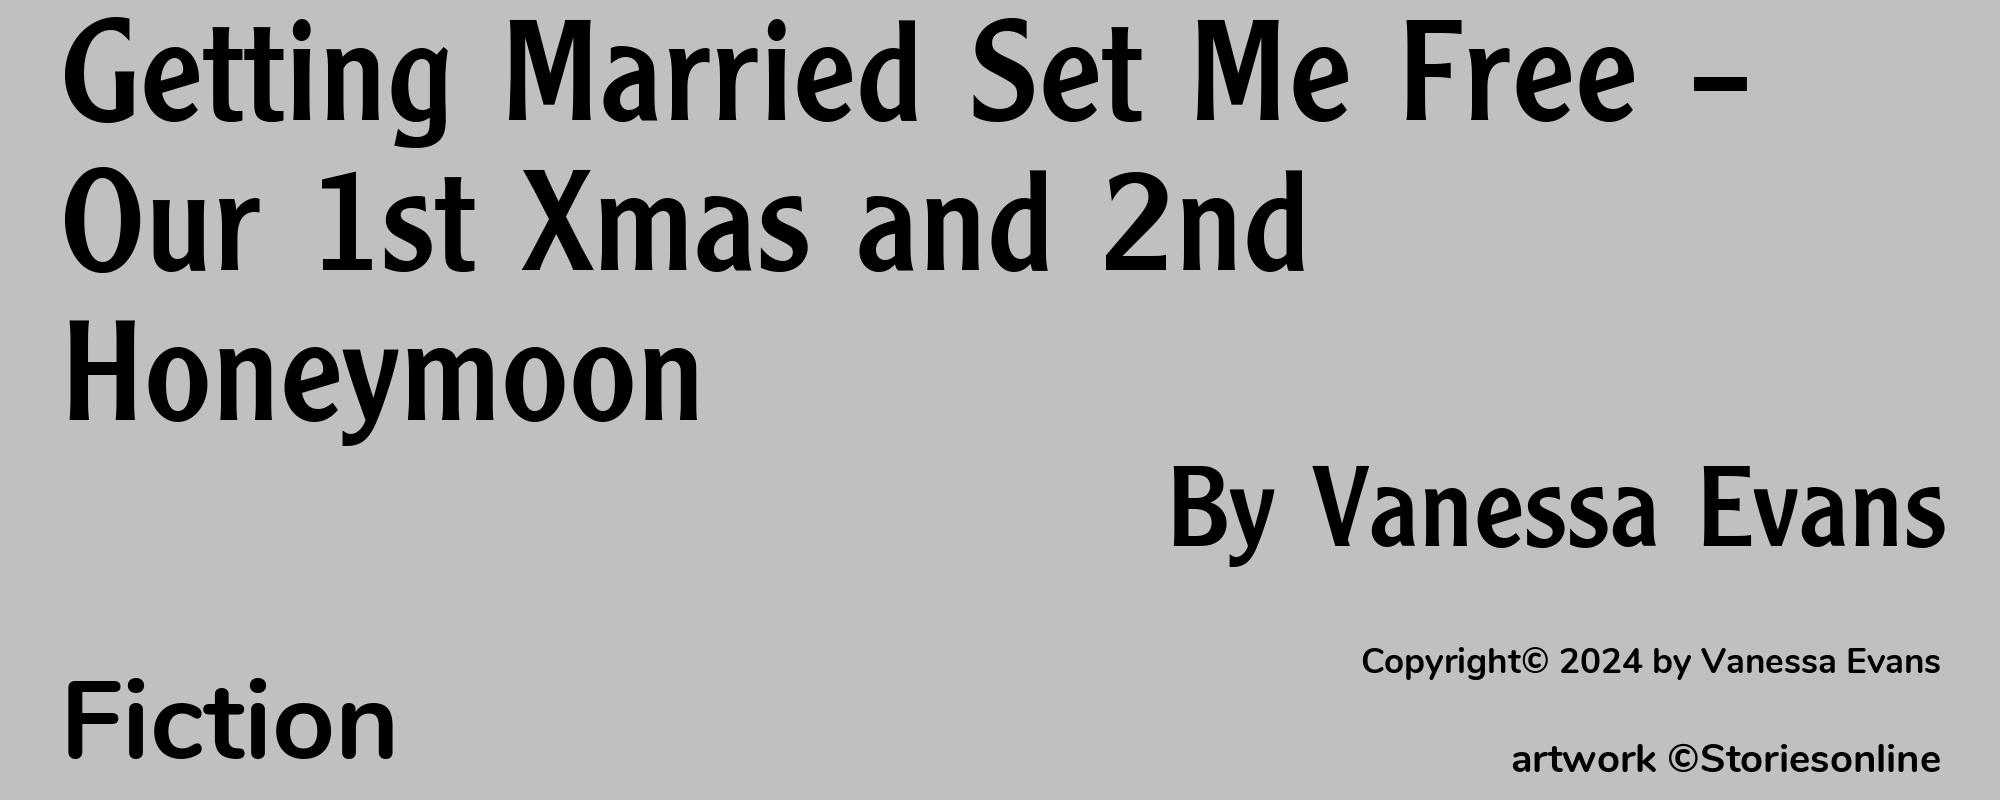 Getting Married Set Me Free – Our 1st Xmas and 2nd Honeymoon - Cover